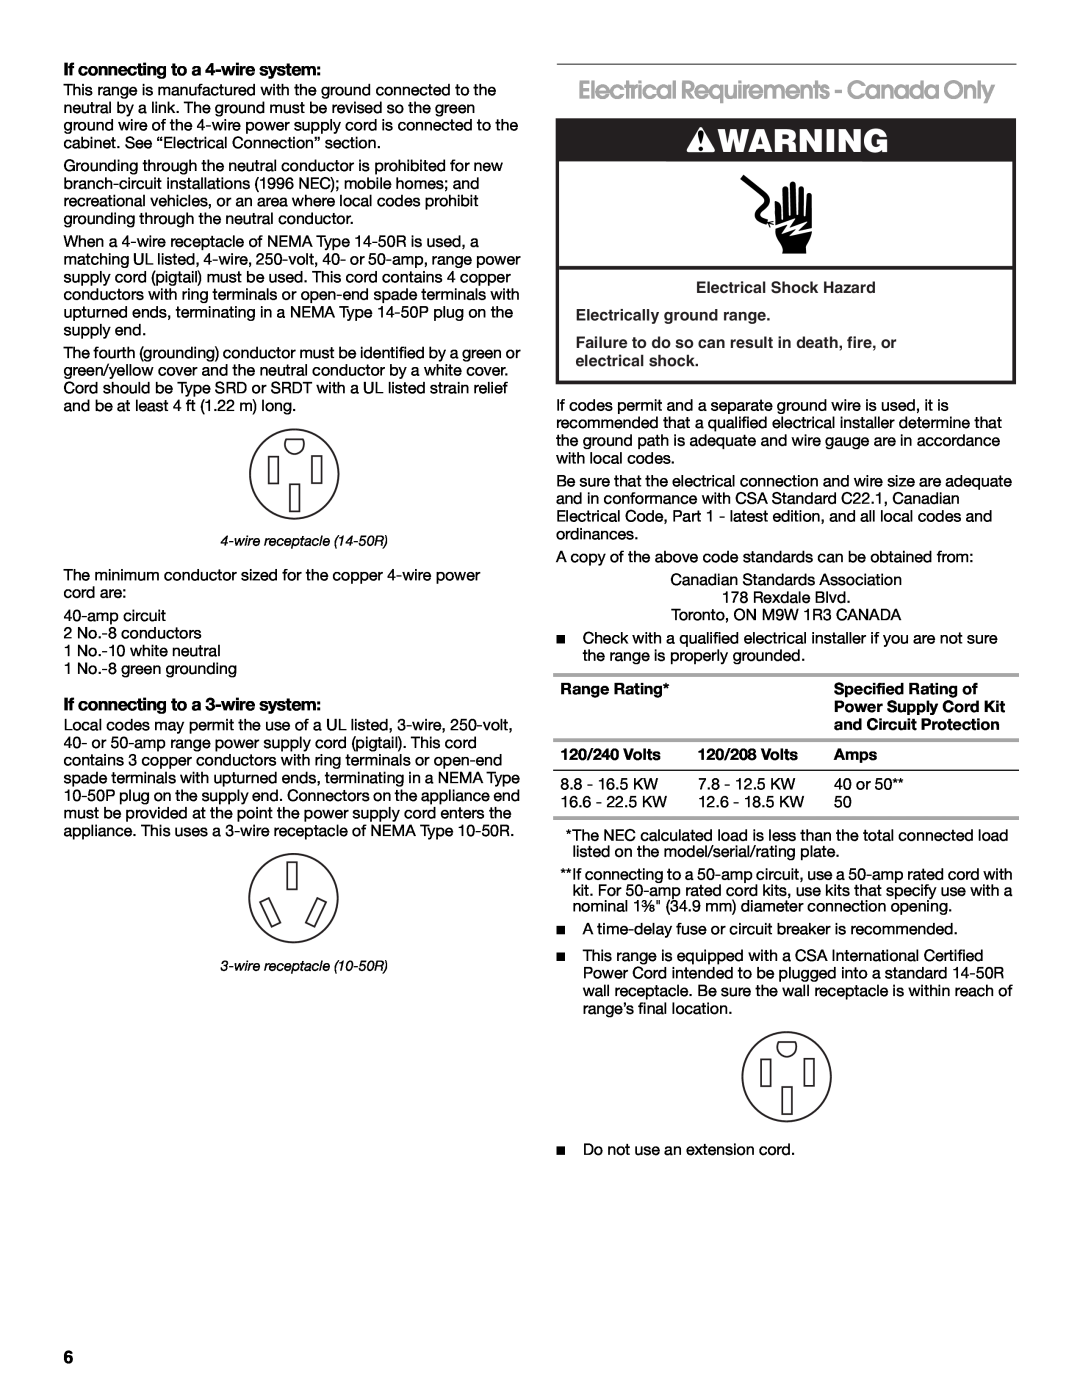 KitchenAid W10526086A Electrical Requirements - Canada Only, If connecting to a 4-wire system, Range Rating, 120/240 Volts 